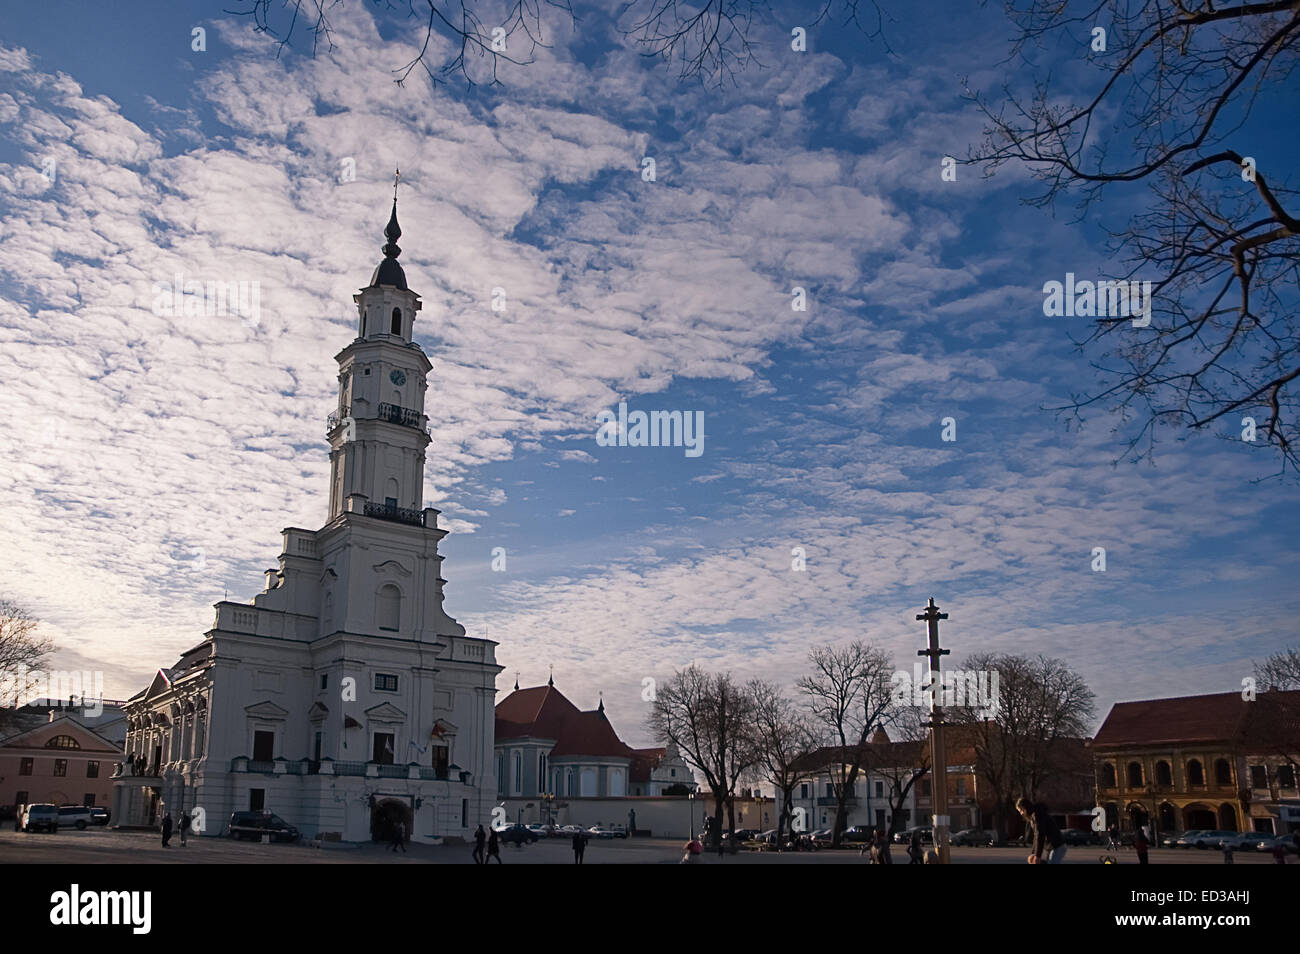 The Old Town Hall (in Lithuanian Rotuse) is located at the center of a picturesque square, which in the past was the center of O Stock Photo